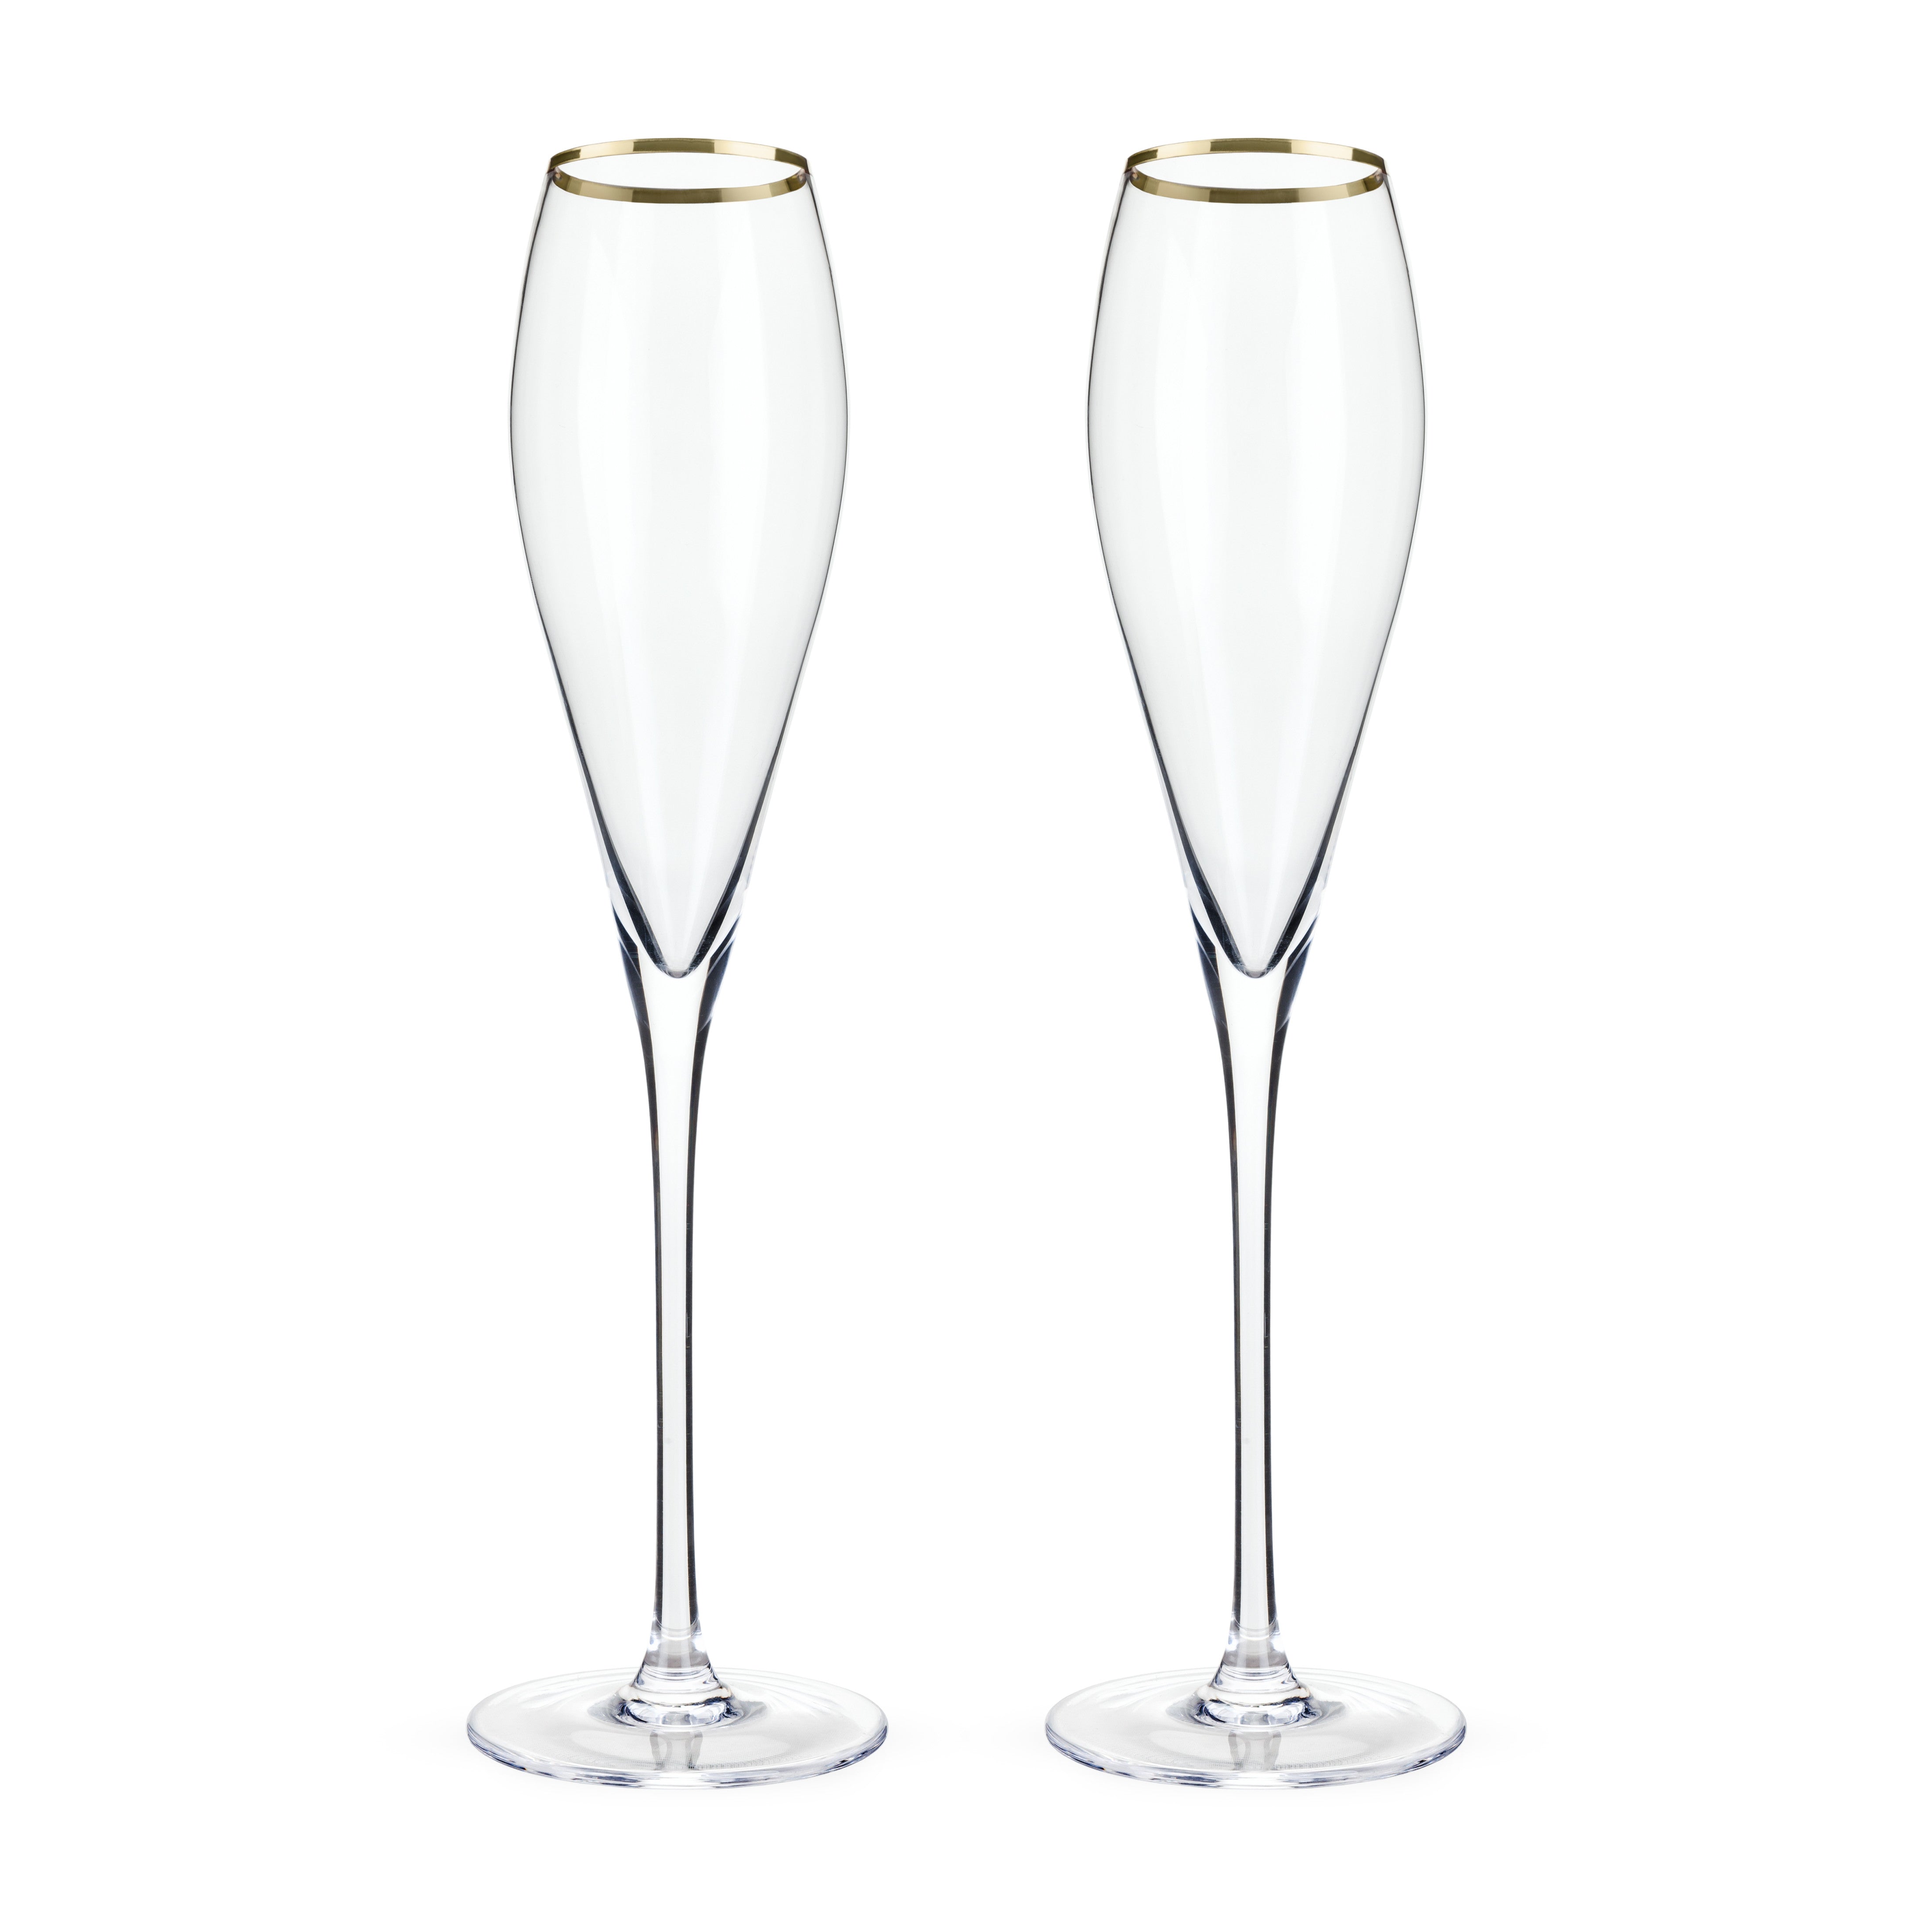 Viski Weighted Stemless Champagne Flutes Glass with Footed Base - Modern  Crystal Flute Glasses - 9.5 Oz Set of 2, Clear